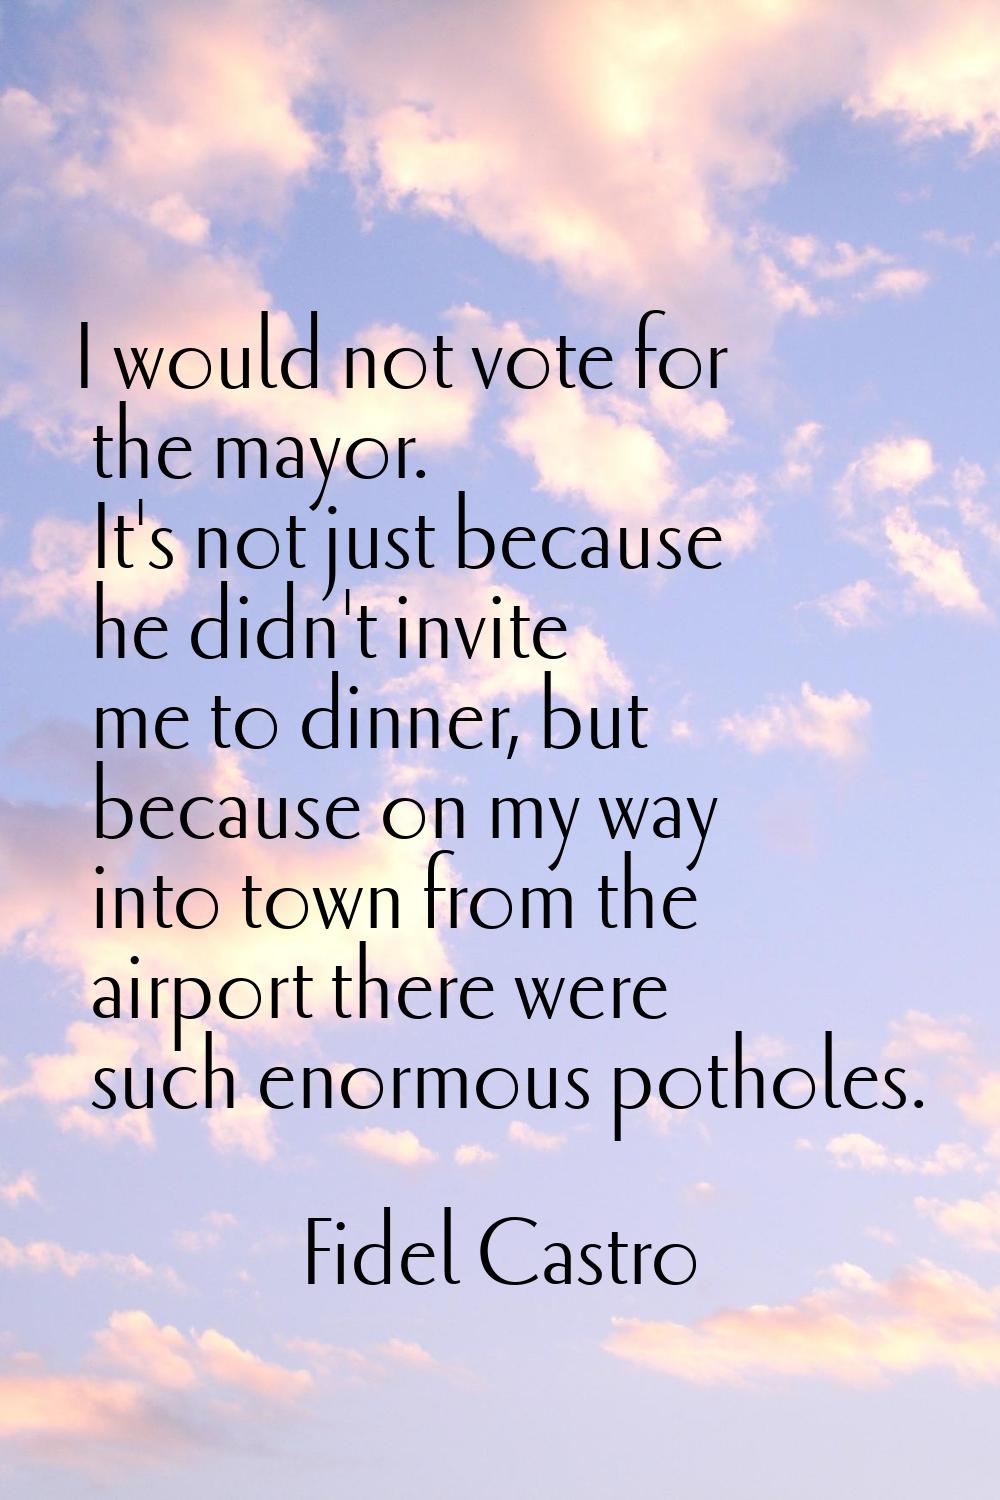 I would not vote for the mayor. It's not just because he didn't invite me to dinner, but because on